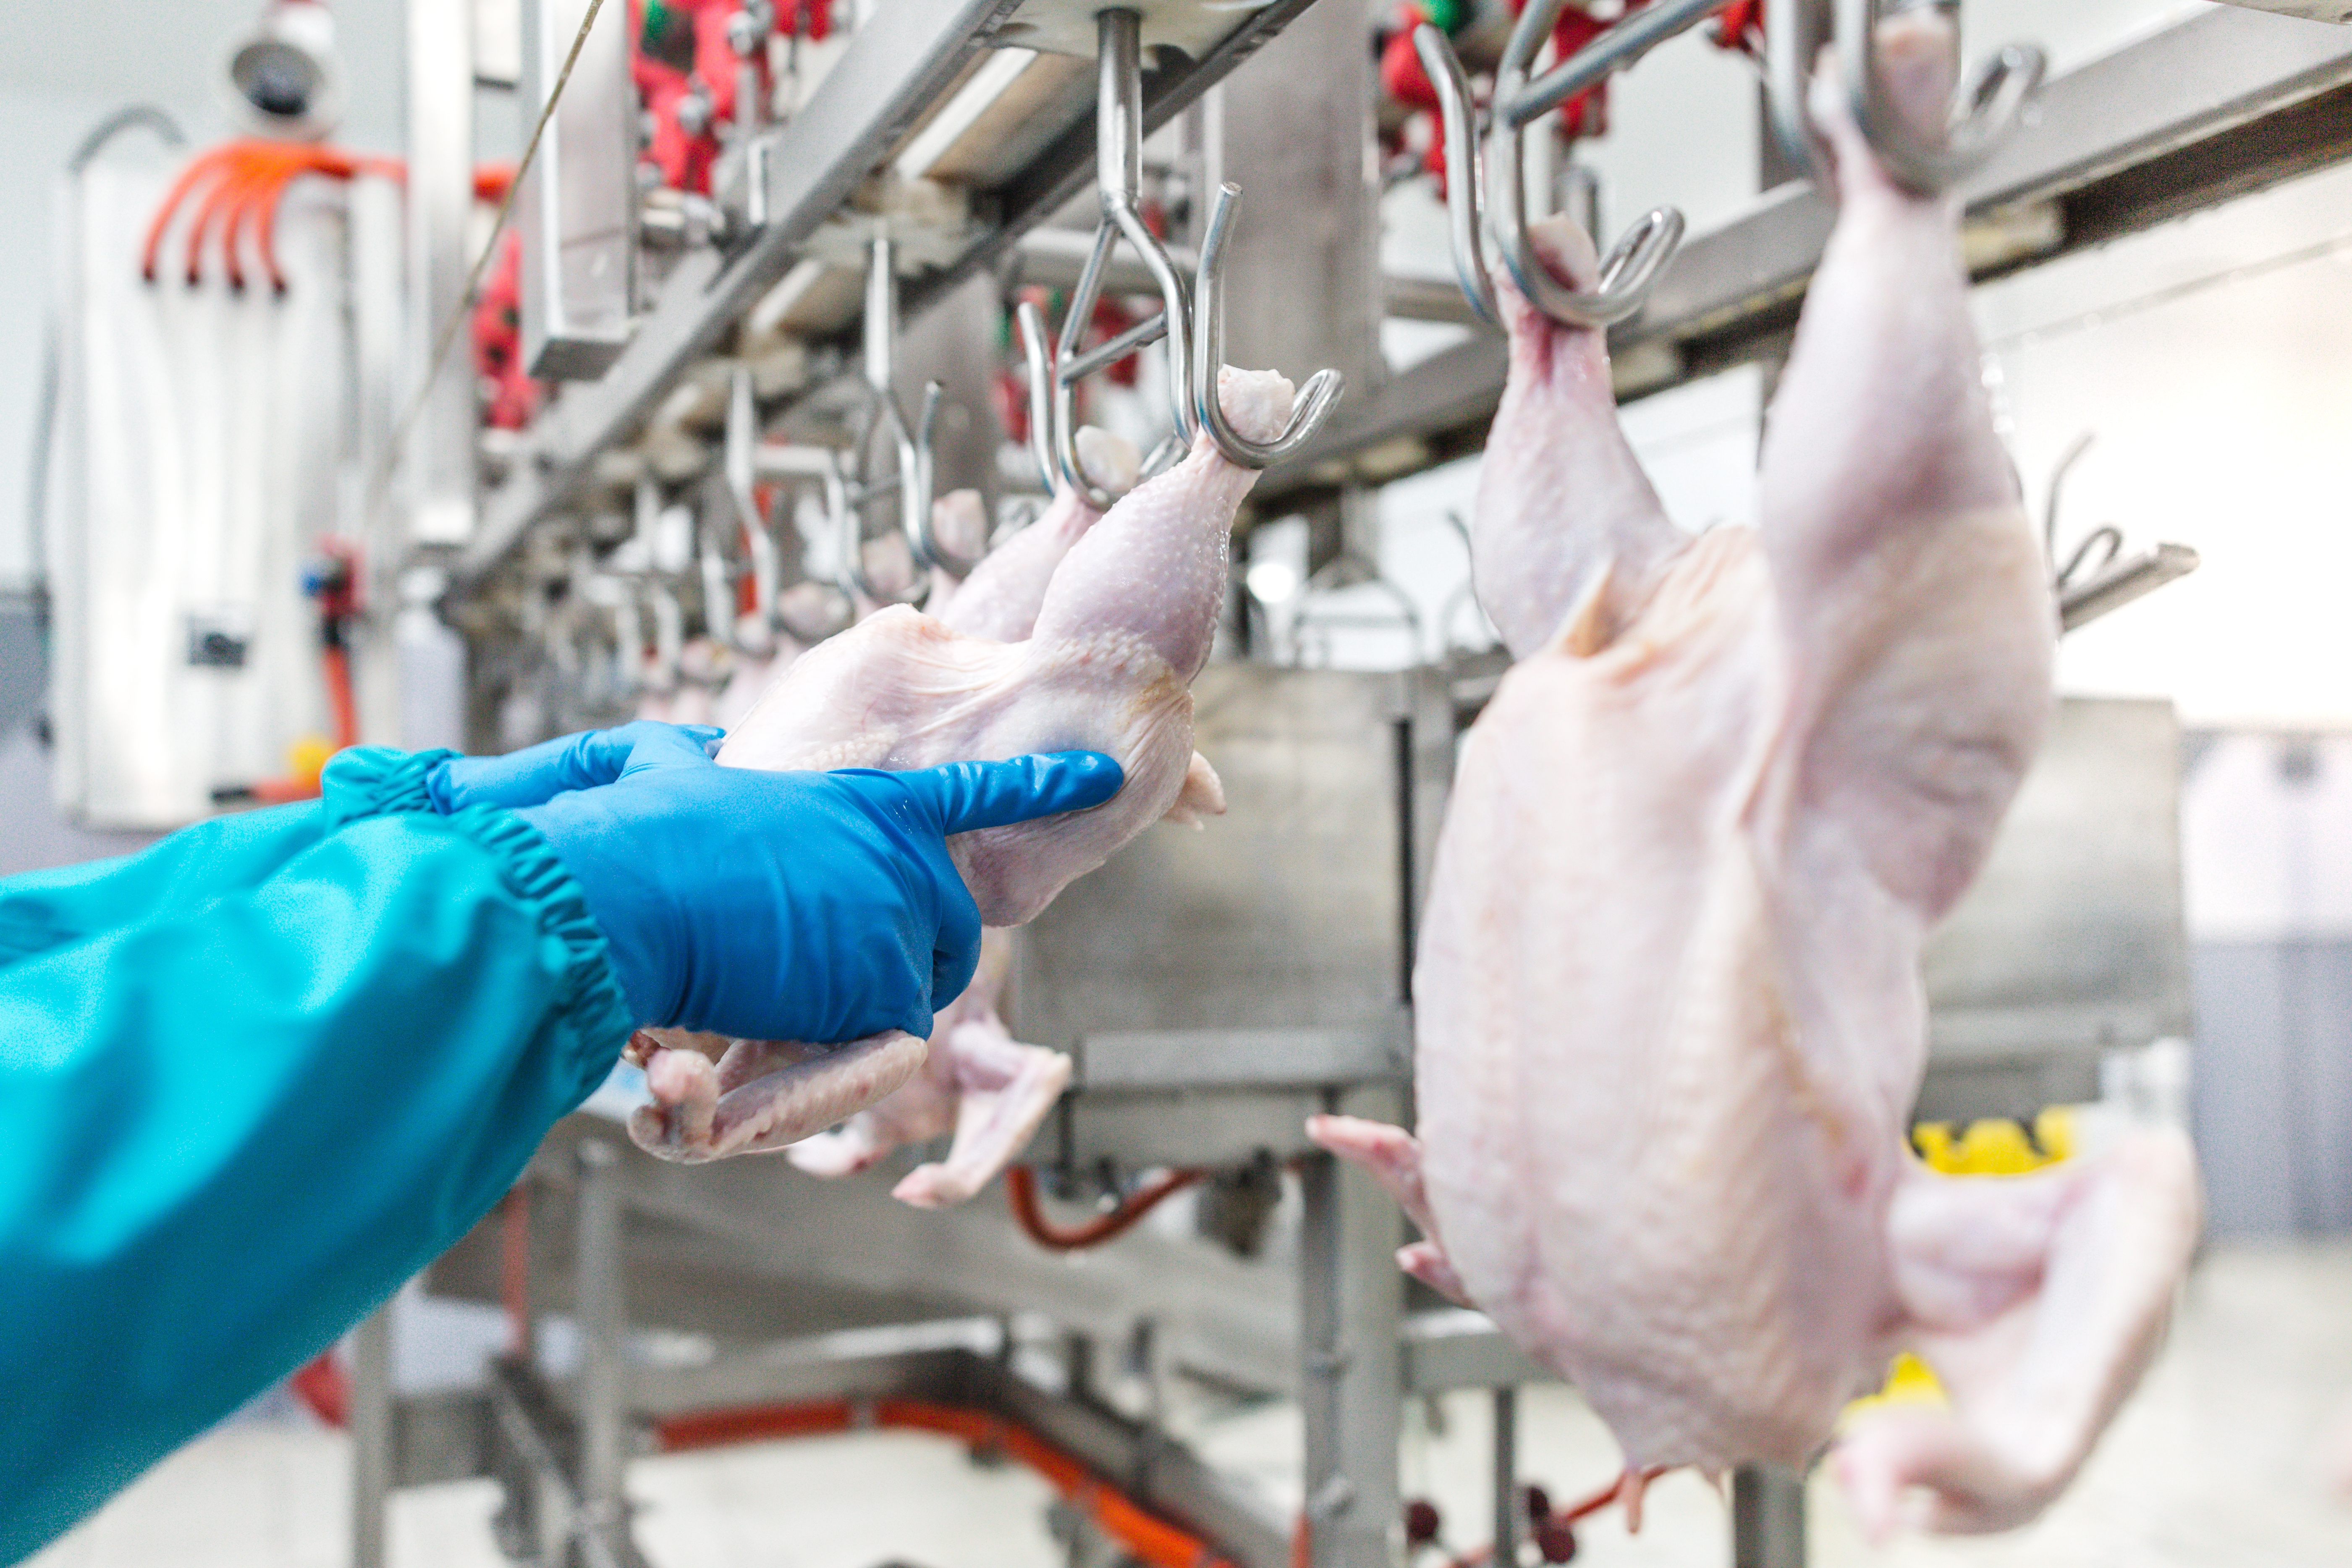 Poultry worker wearing blue rubber gloves, attaching a chicken carcass to a conveyer belt